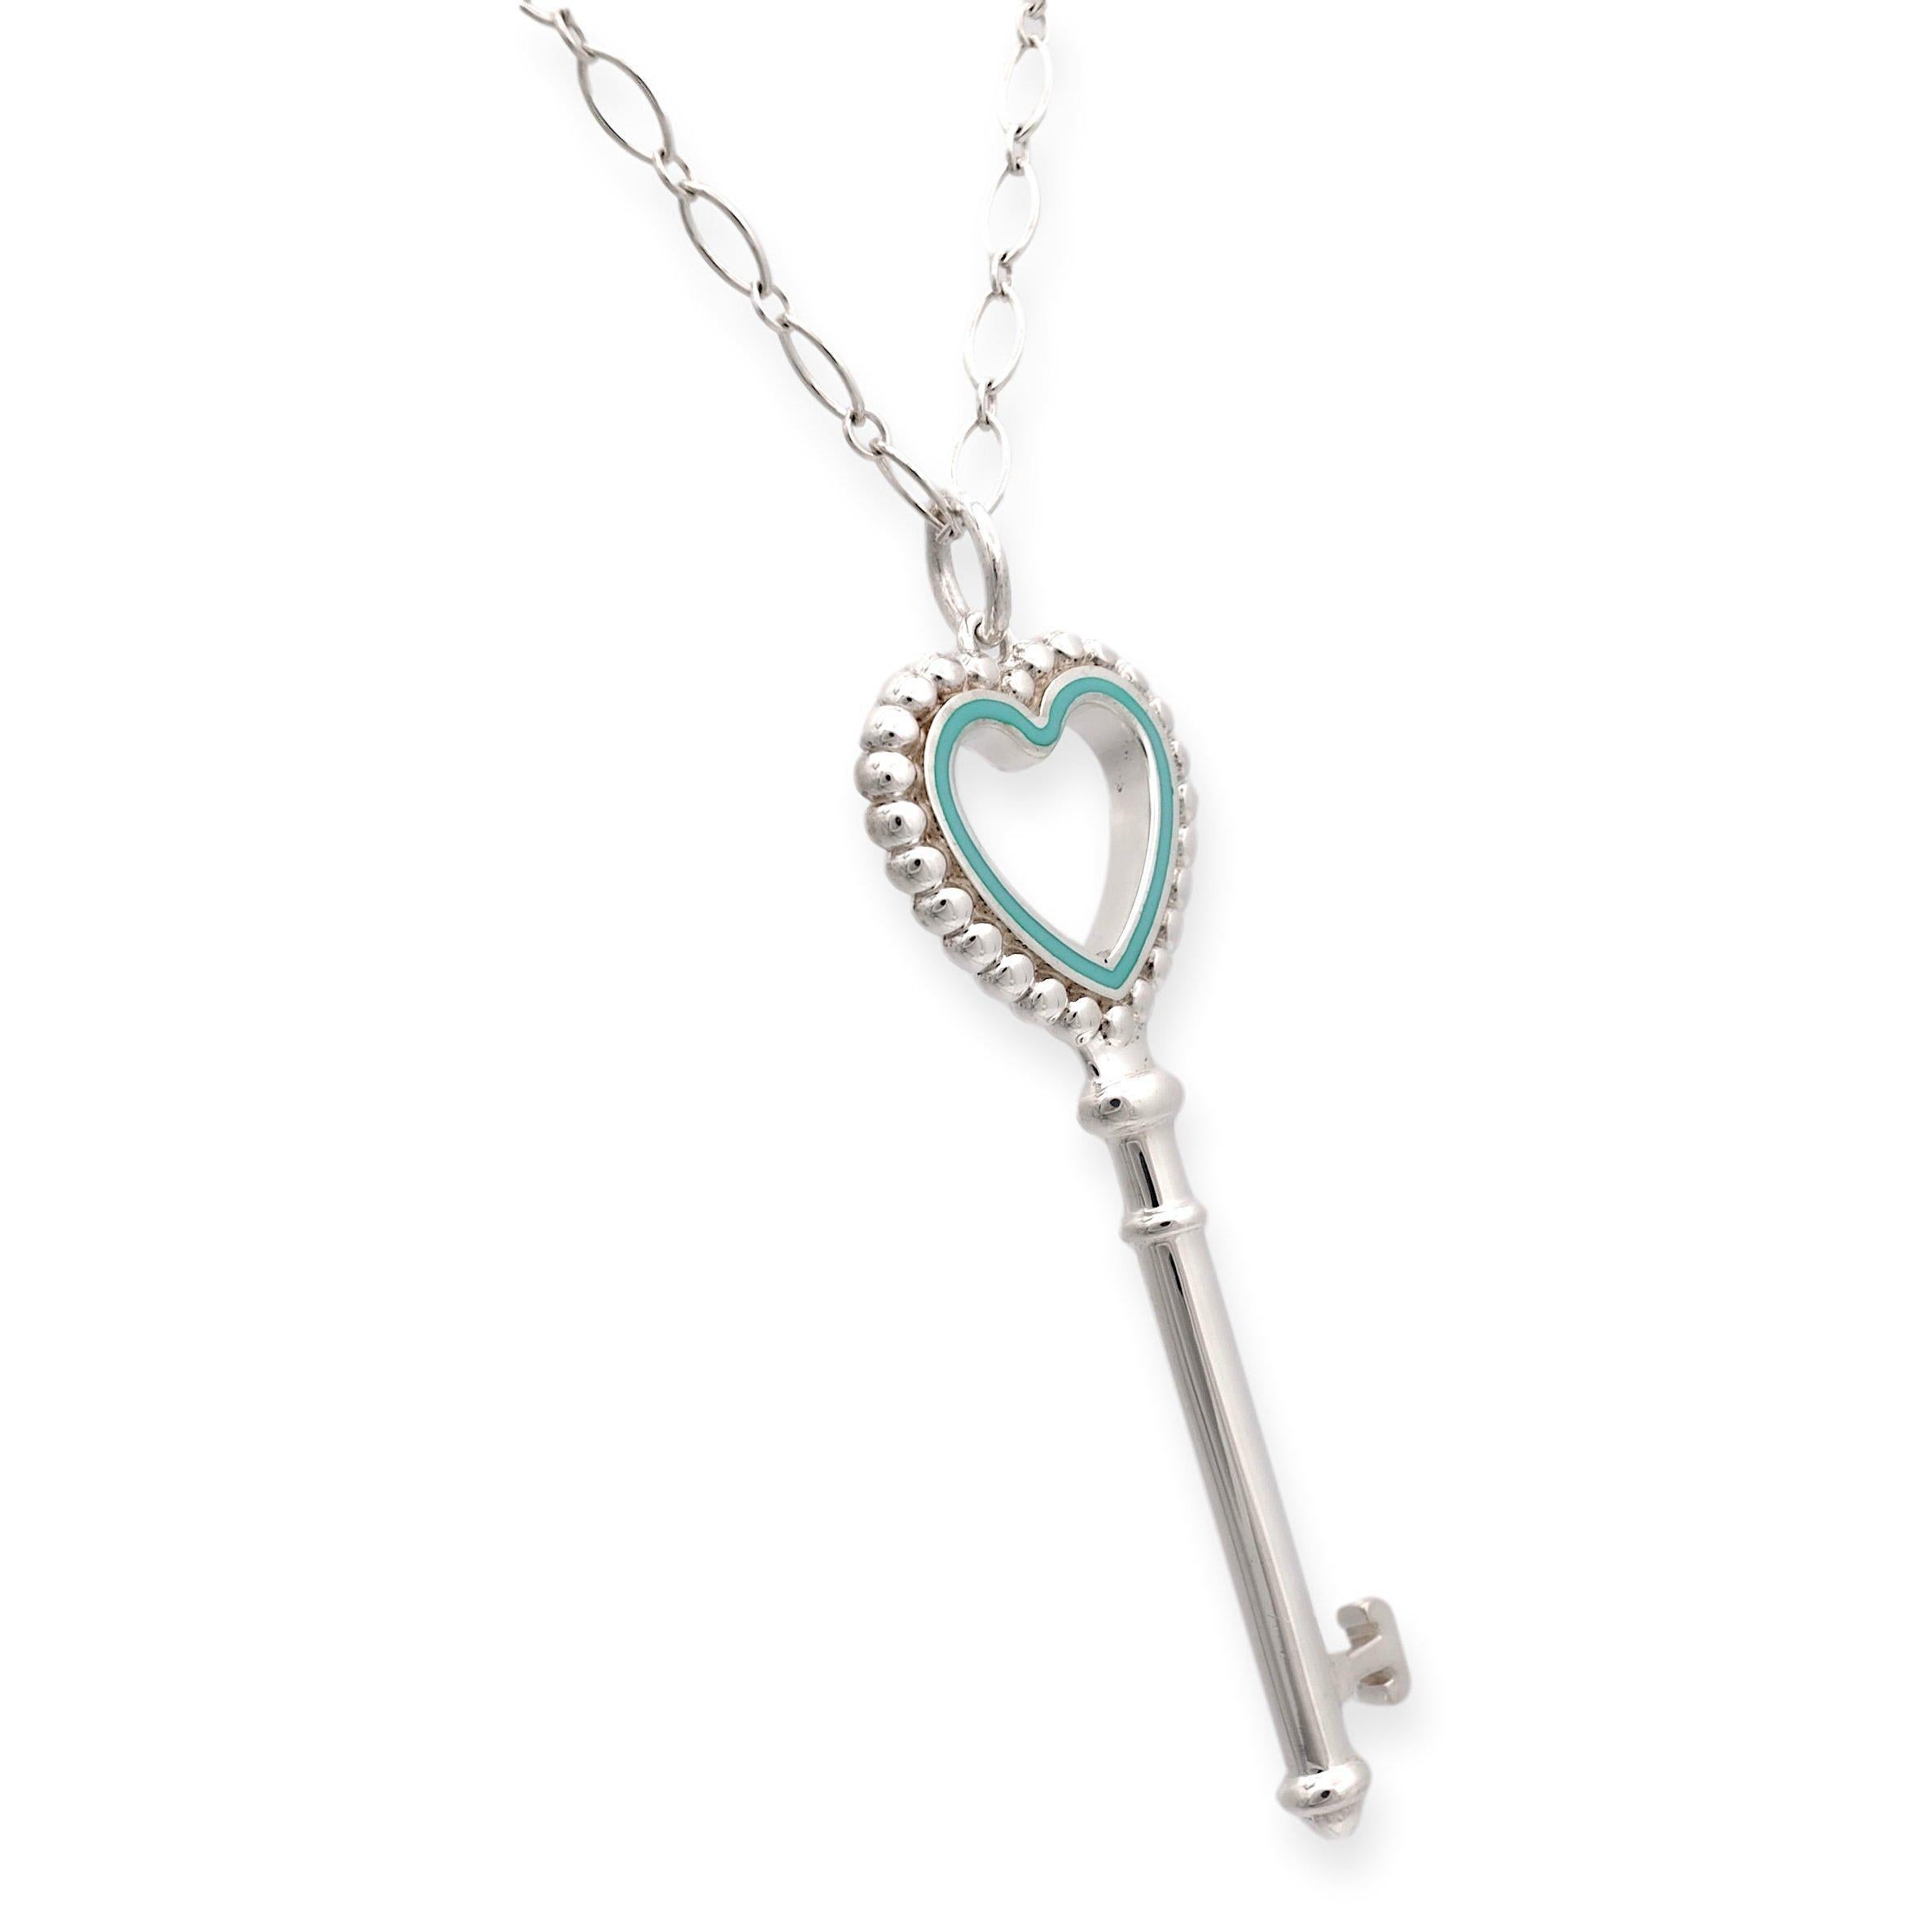 Tiffany & Co. Heart Key Pendant. Crafted with precision in sterling silver and adorned with a delicate blue enamel border around the heart, dangling gracefully from a 30-inch oval link necklace, fastened with a secure spring ring closure. The